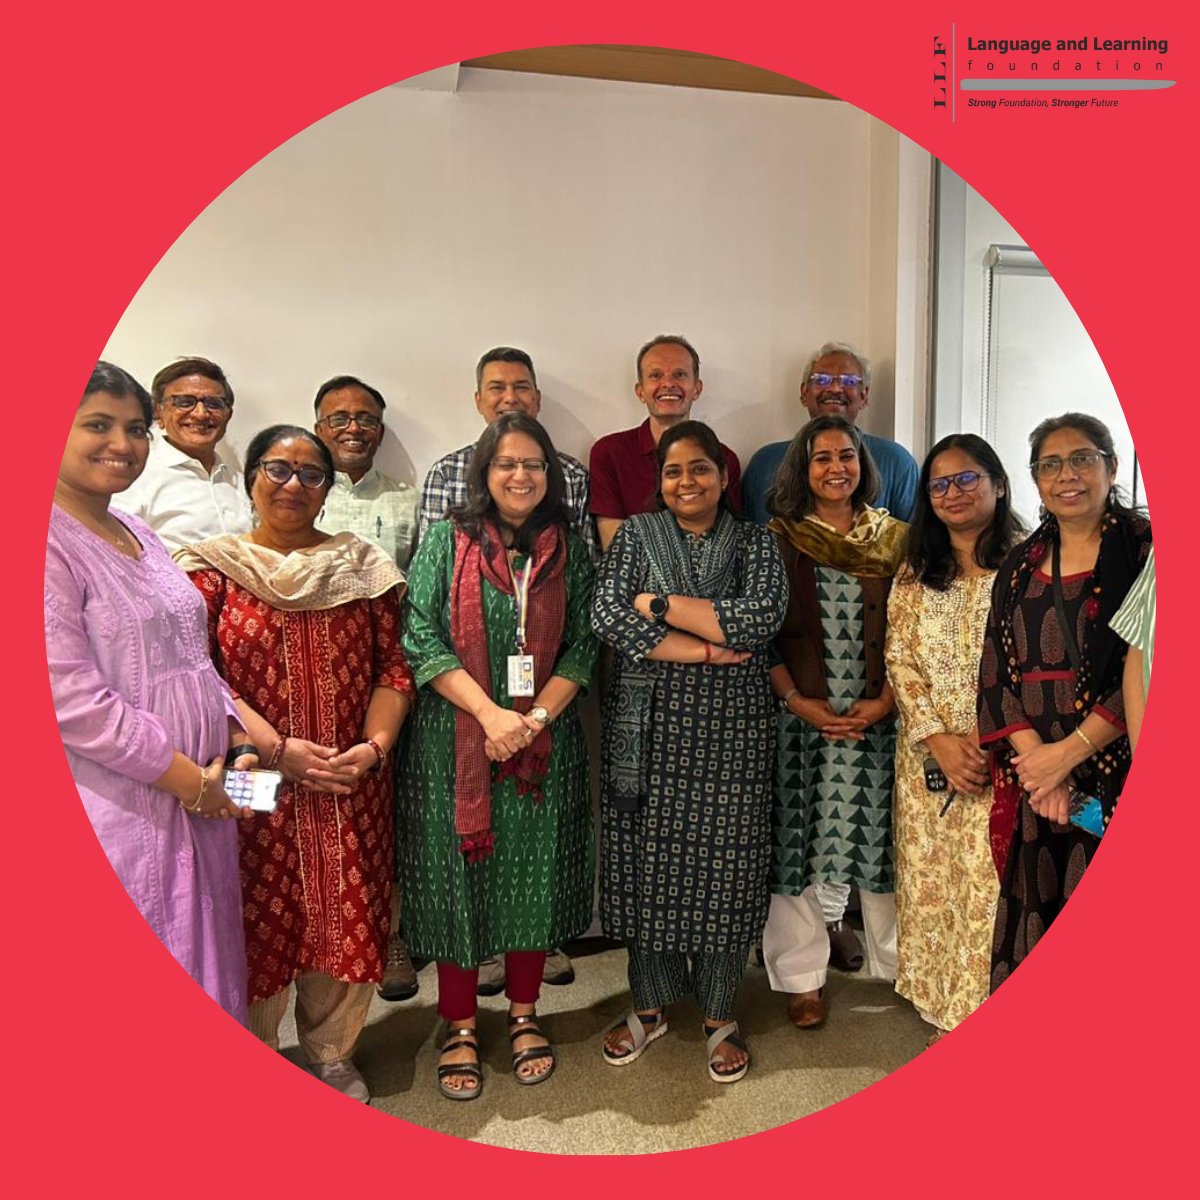 Glimpses from the 4th meeting of National Consultative Group on #MLE held at the @BritishCouncil reaffirm the furthering of understanding of MLE within NGOs, state govts, funders, academia and practitioners.@CAREIndia @IgnusPahal @ncert @roomtoreadindia @SILintl @unescobangkok